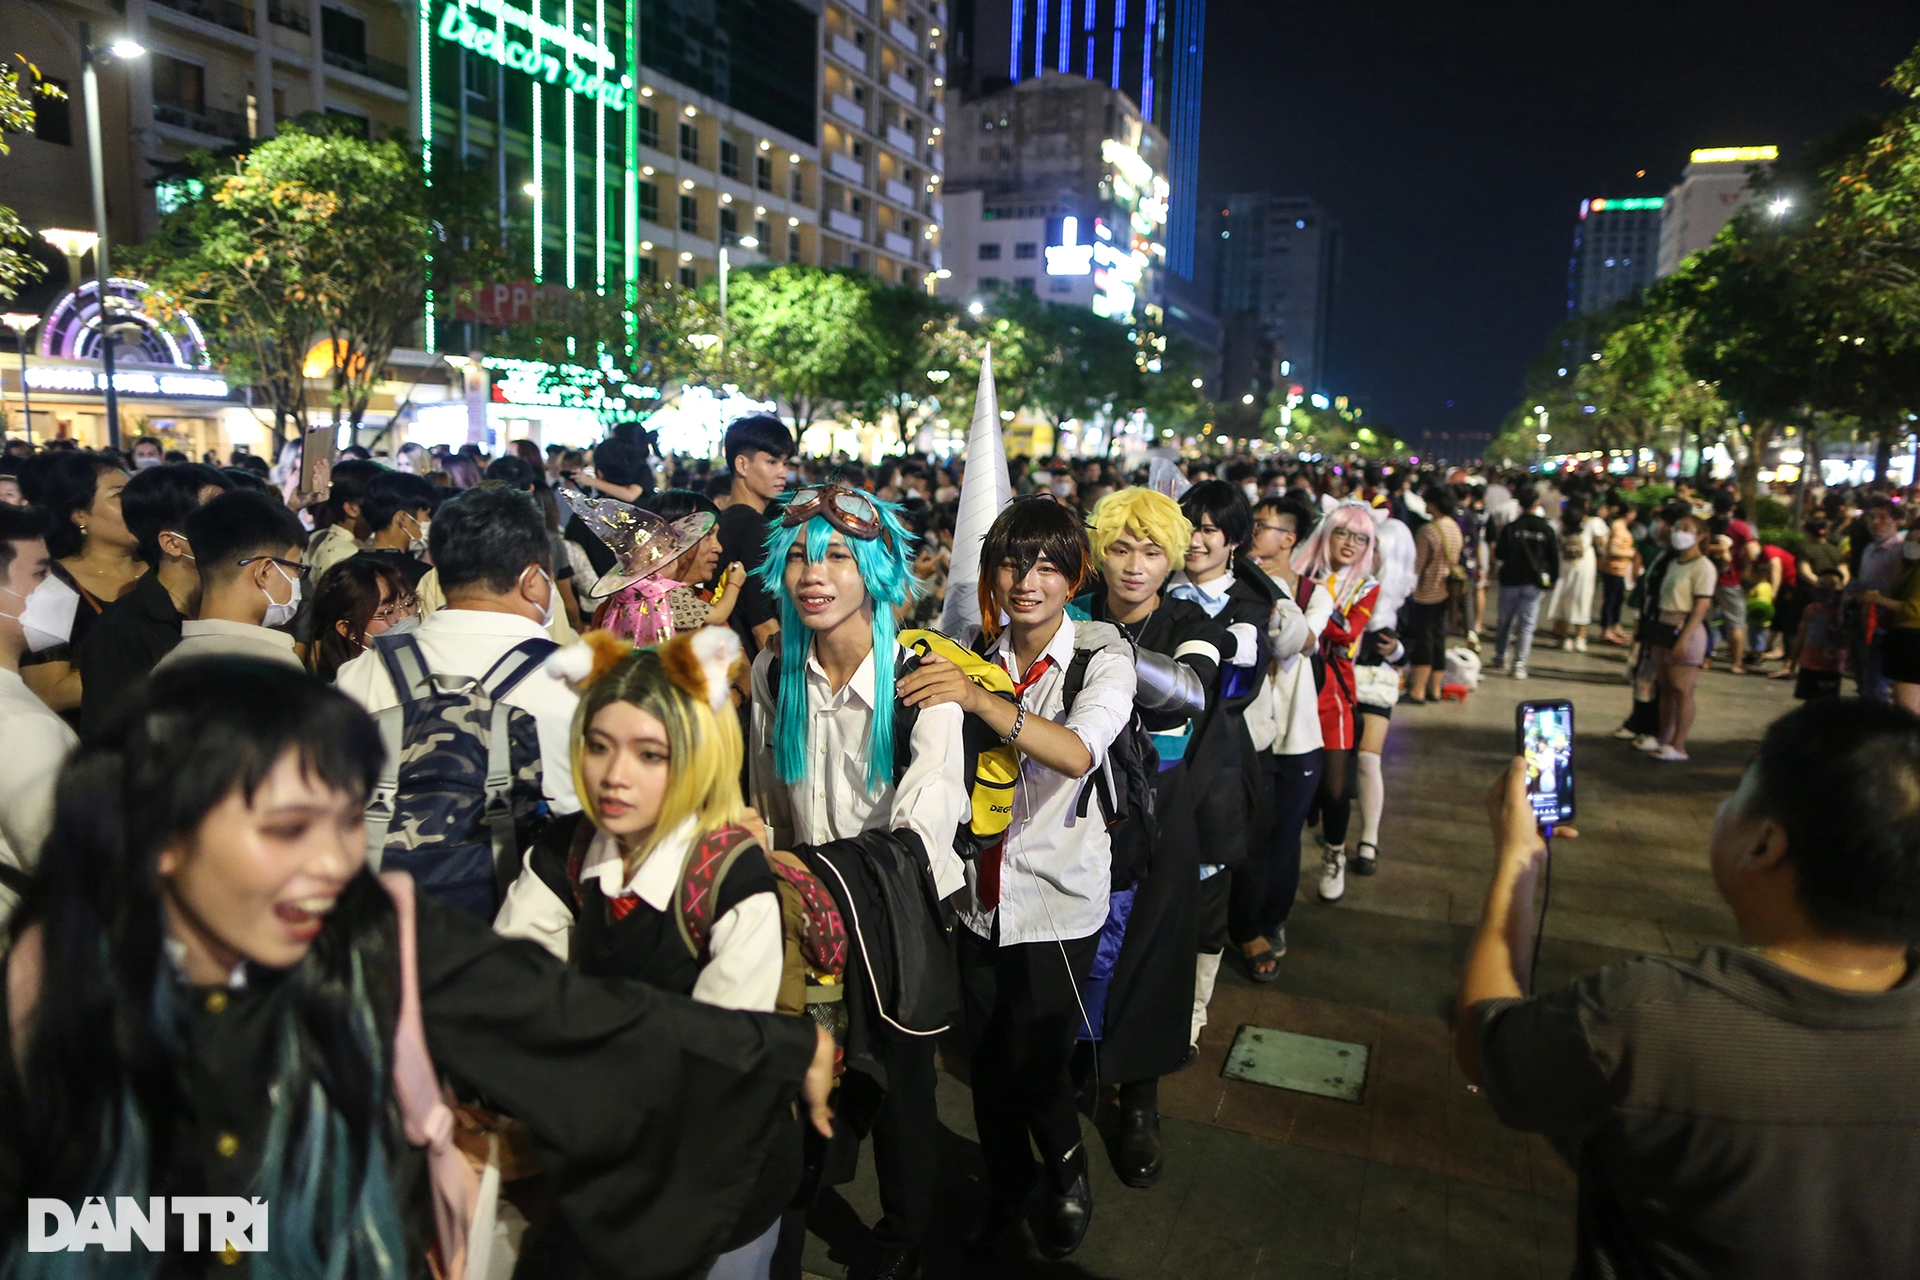 Young people in Ho Chi Minh City dressed up in strange costumes to play Halloween early on Nguyen Hue Street - 6